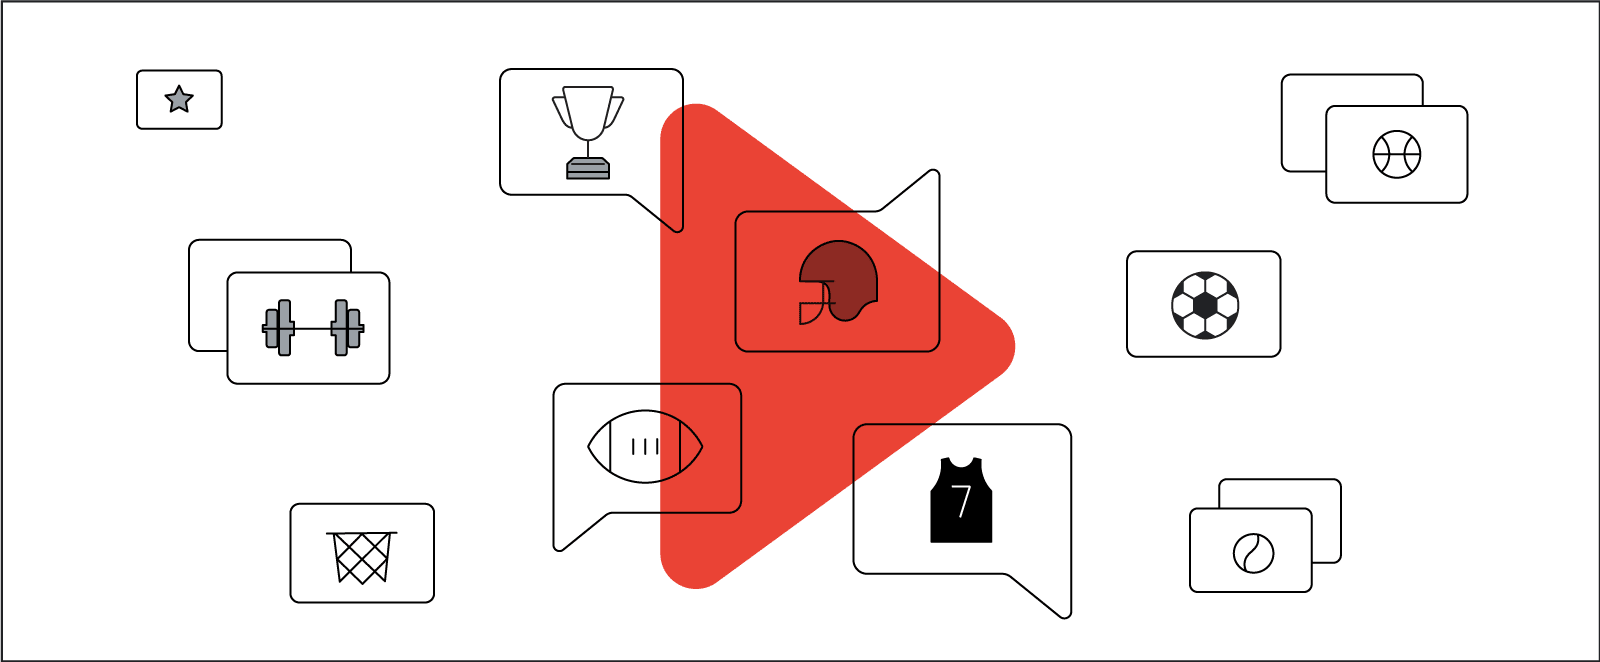 An array of illustrated icons relating to sports, like balls, jerseys, weights, and trophies, are in comment bubbles, hovering around a big, red YouTube play button.